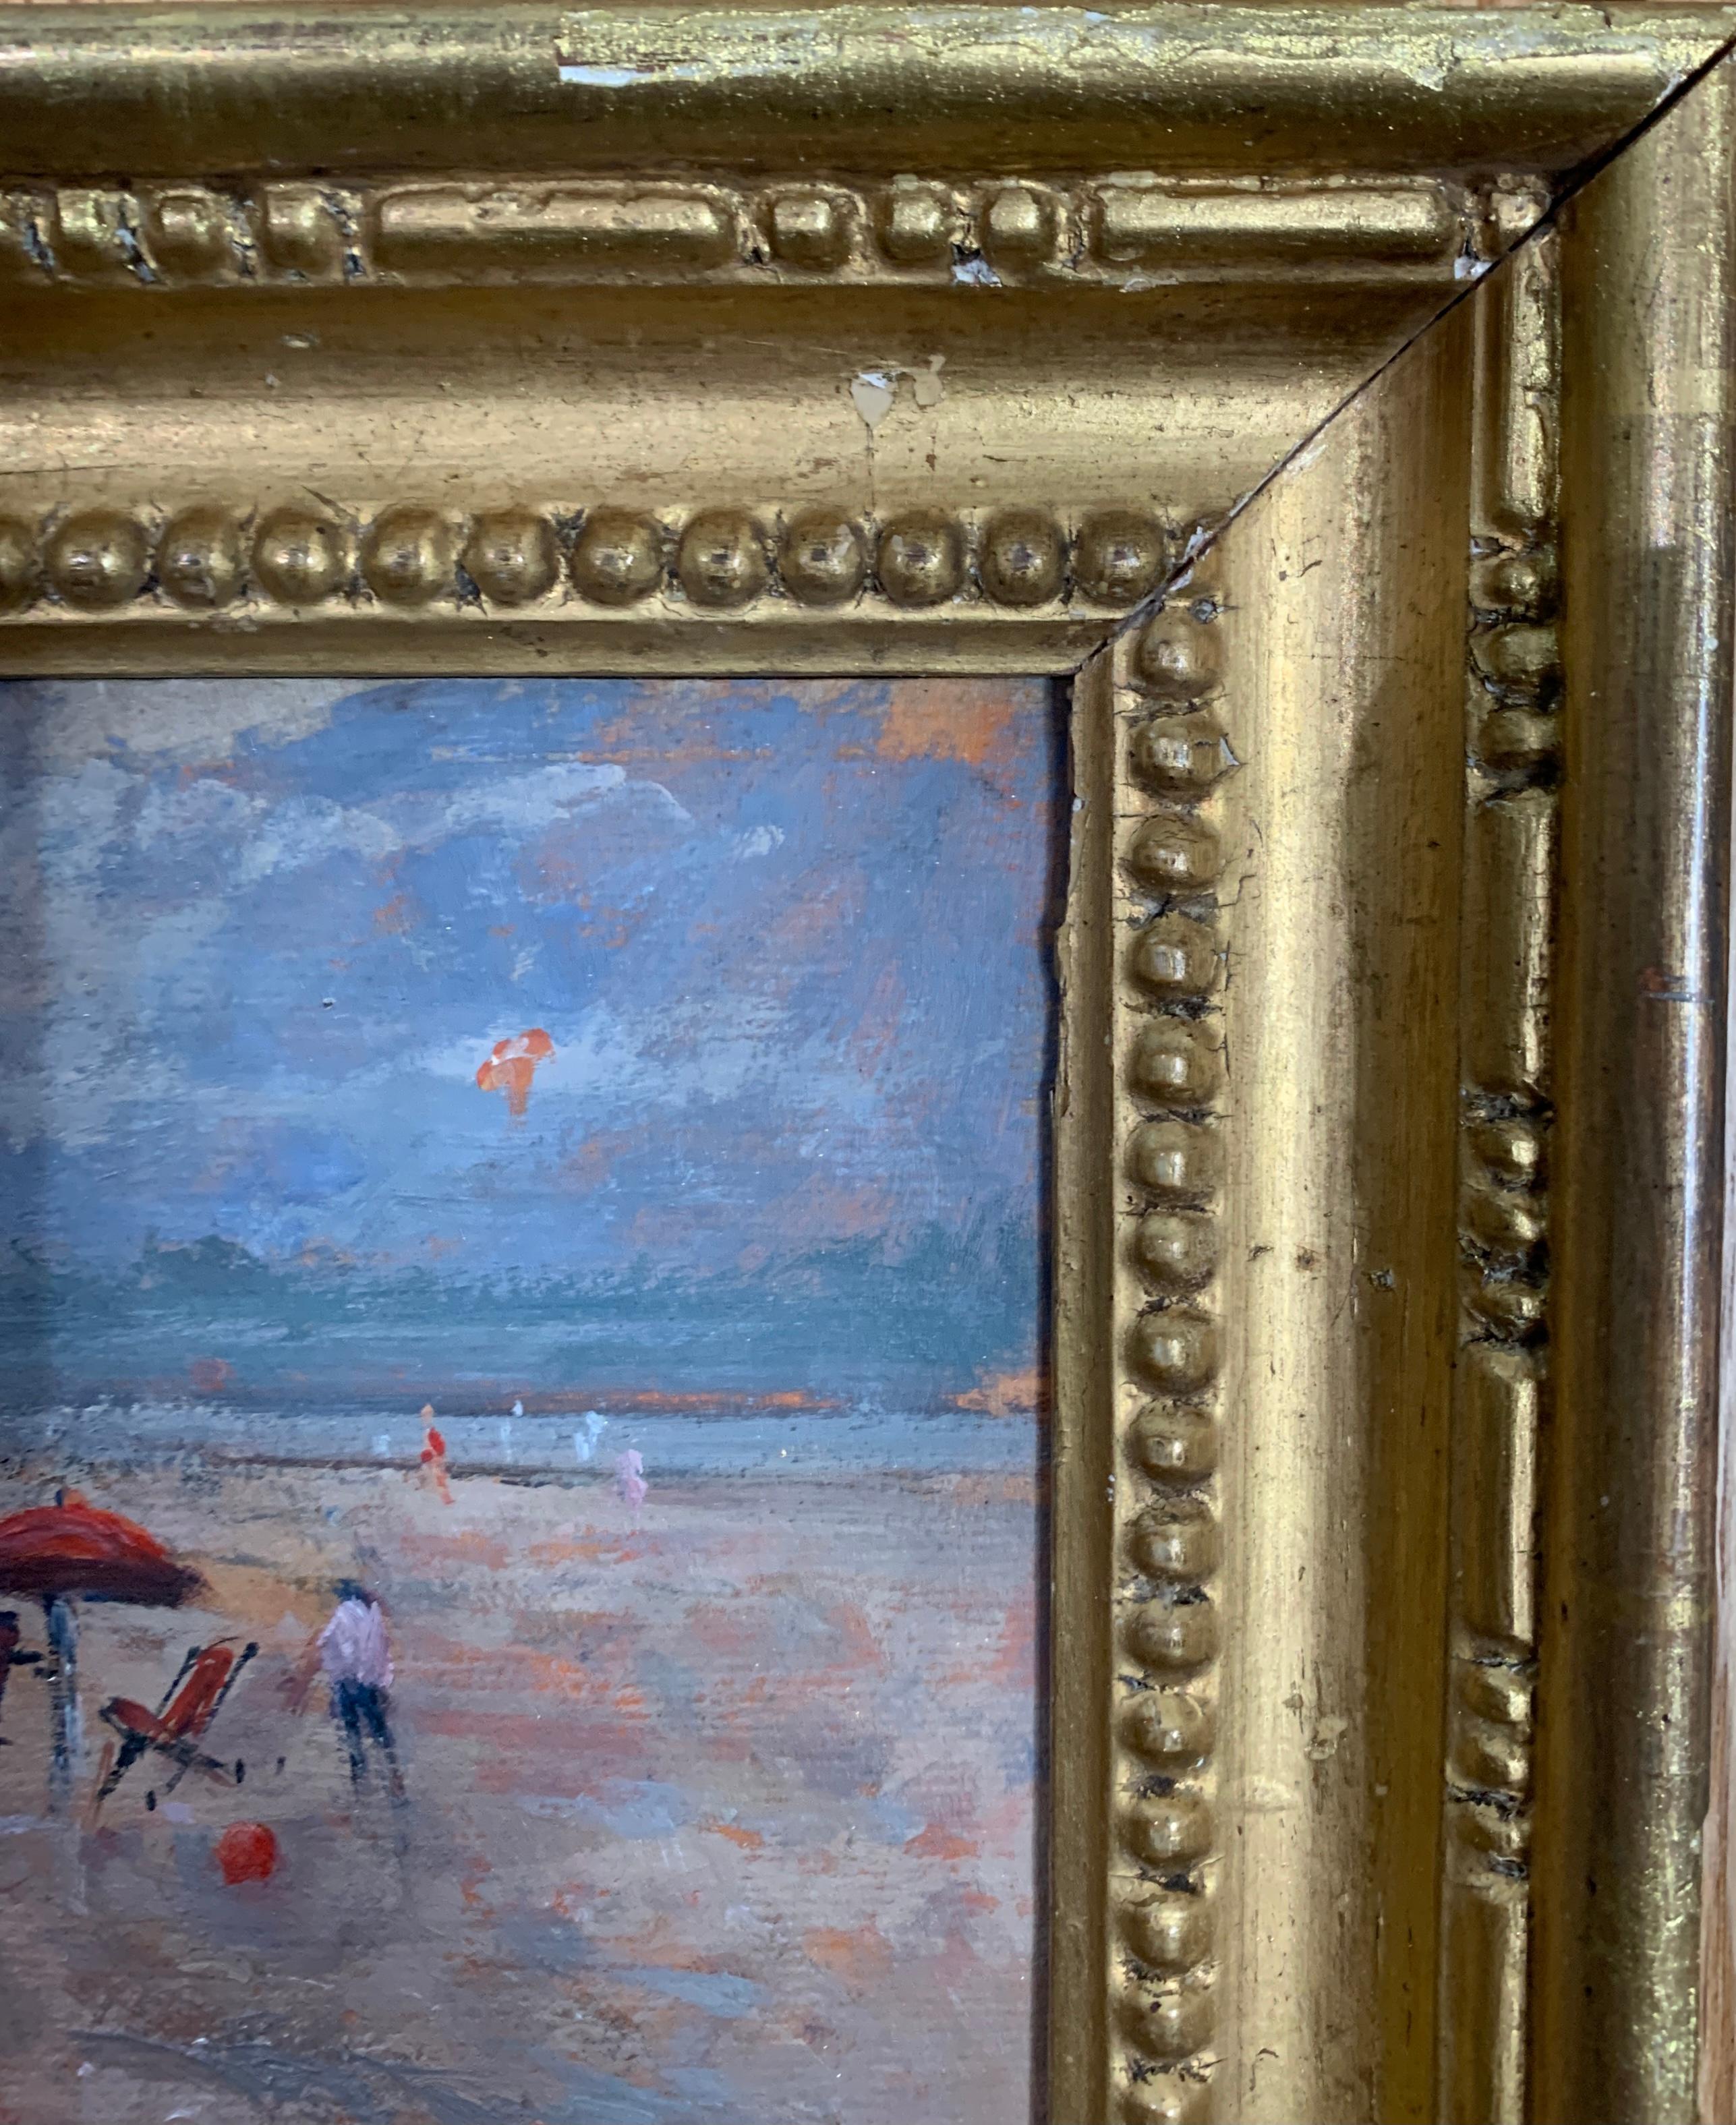 English Impressionist 20th century, Figures on a beach, Great Yarmouth, England - Gray Landscape Painting by Keith Johnson